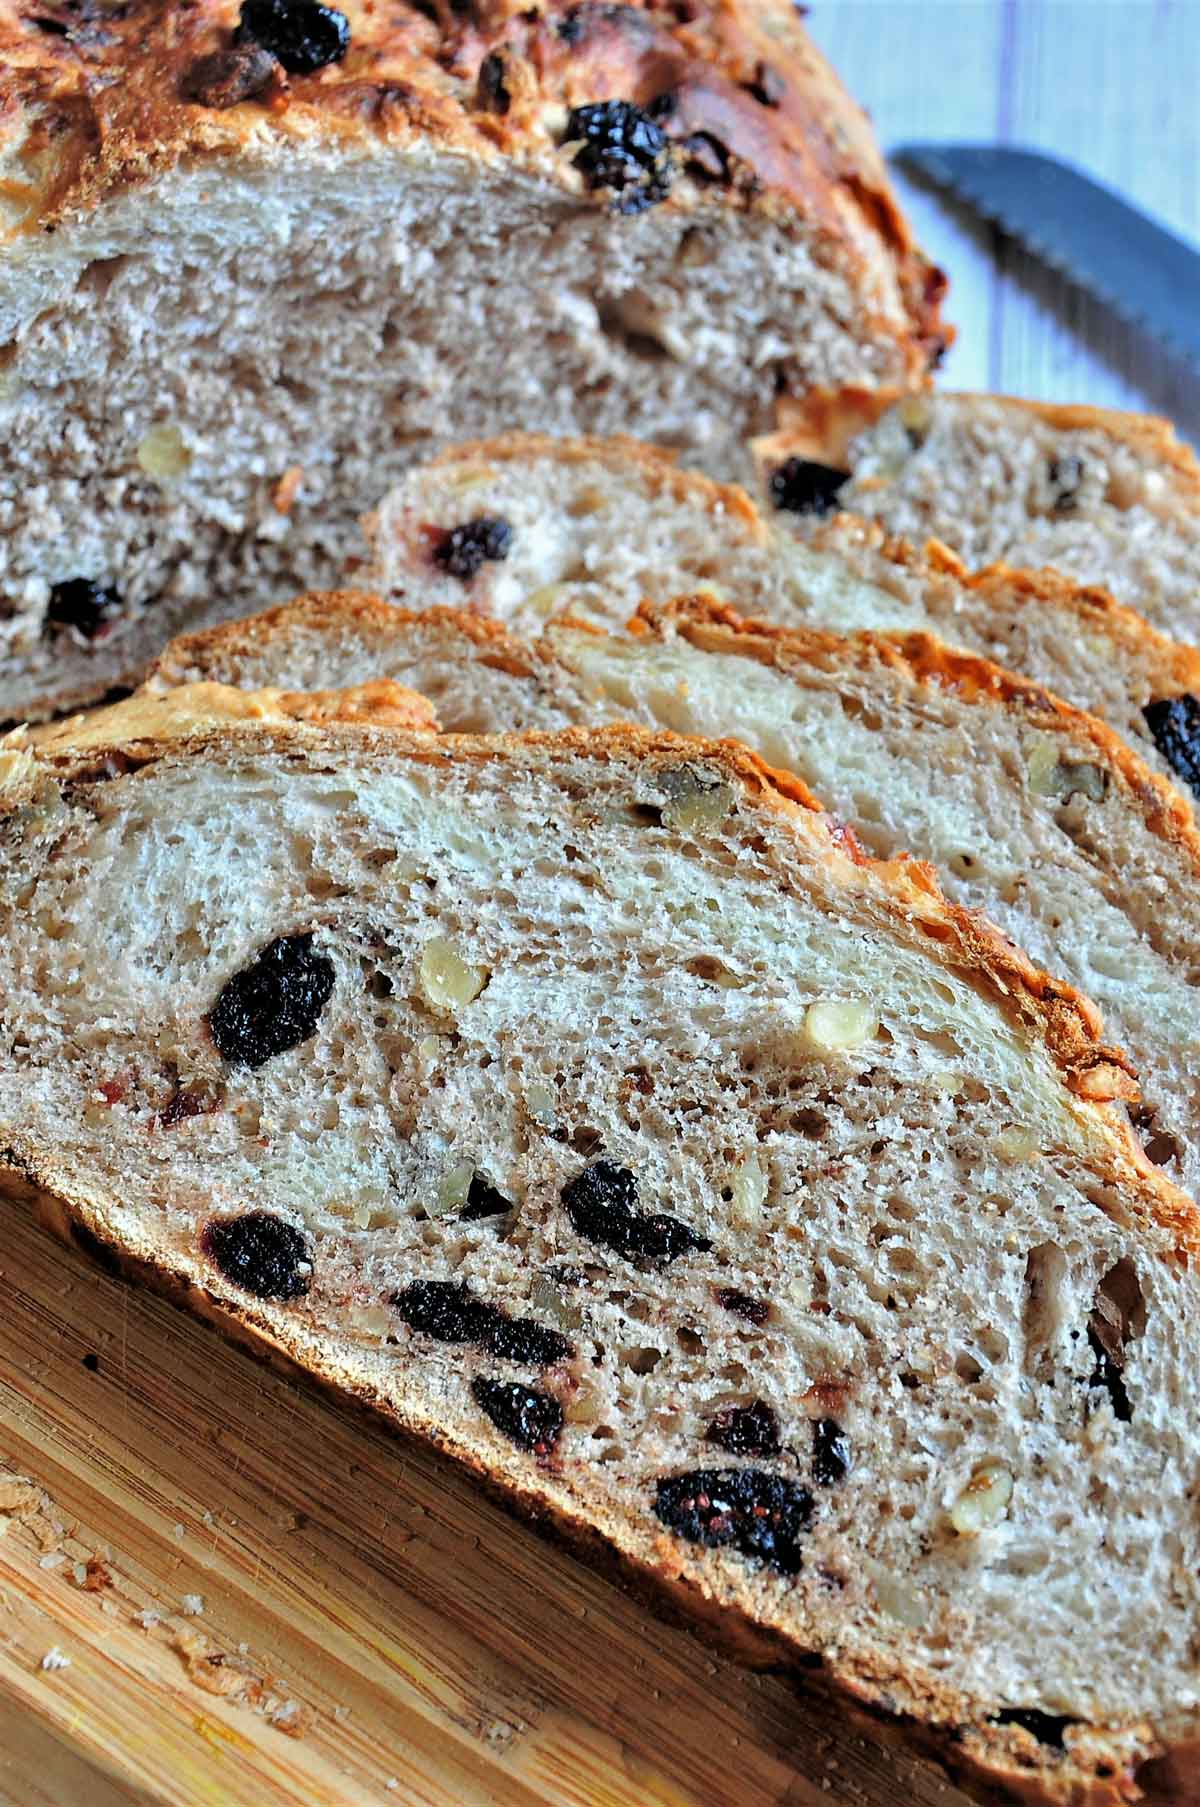 Slices of cranberry bread.